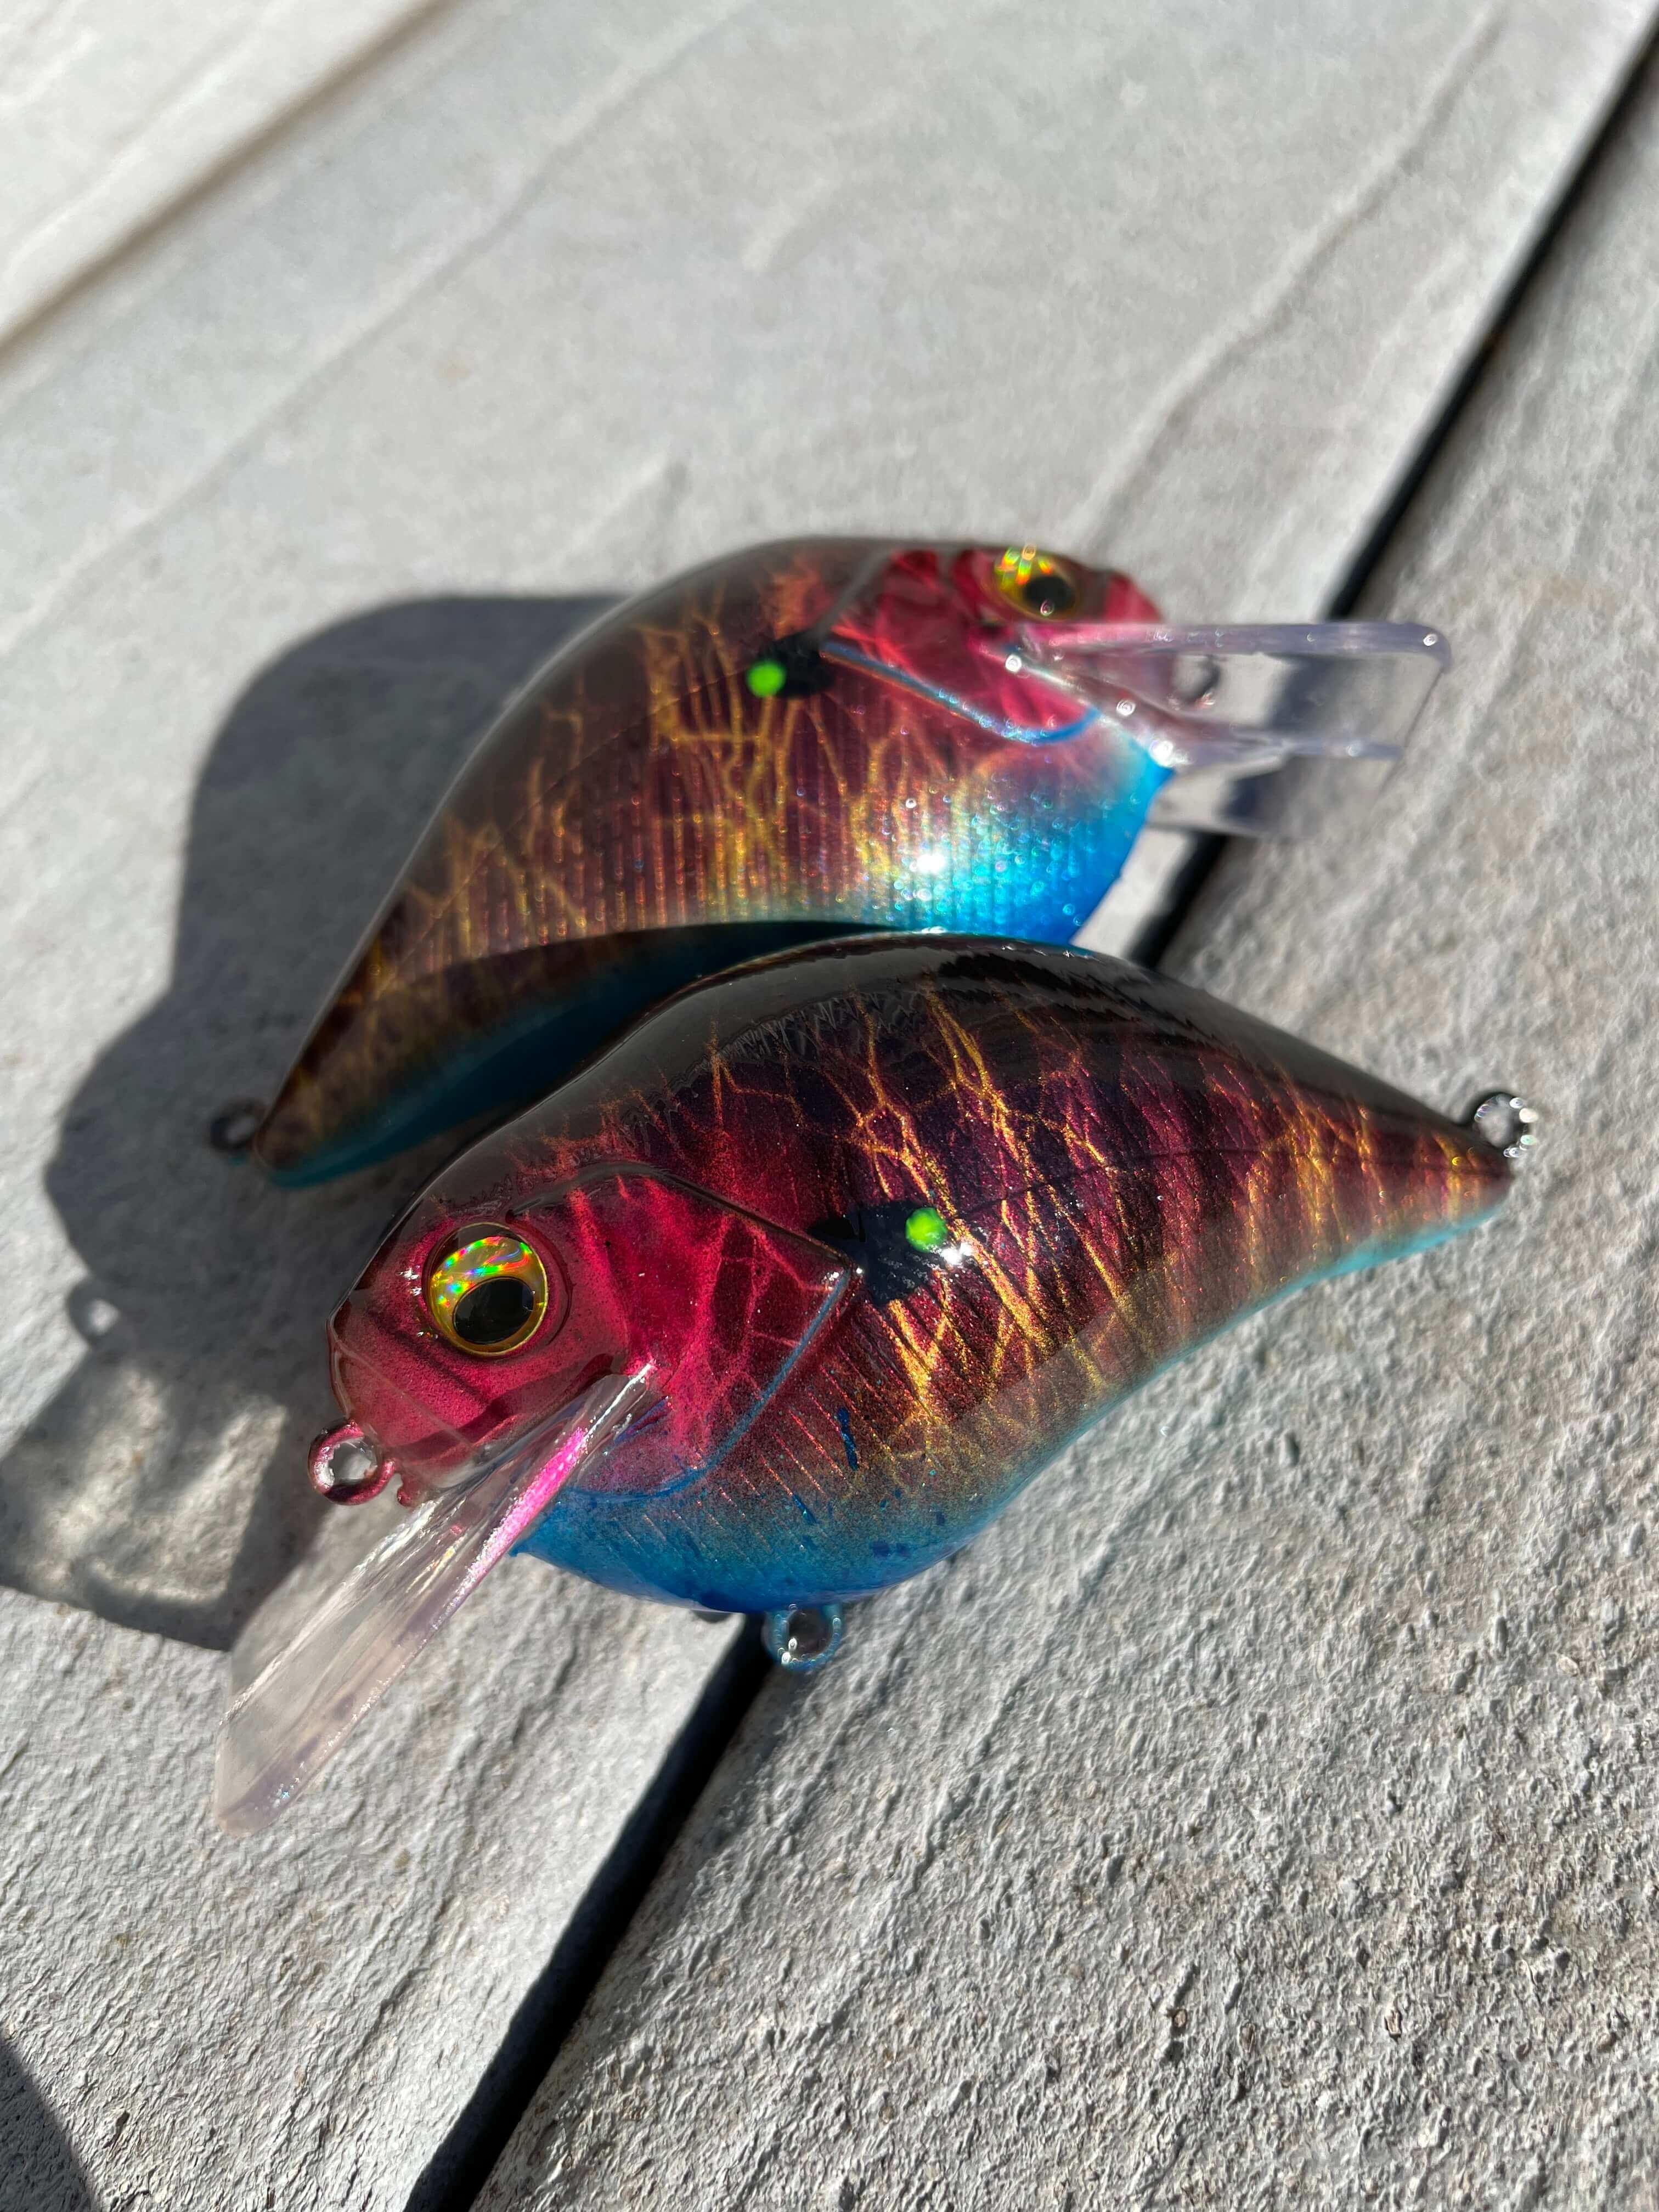 lure painting with solarfall baits: how to paint a shad 